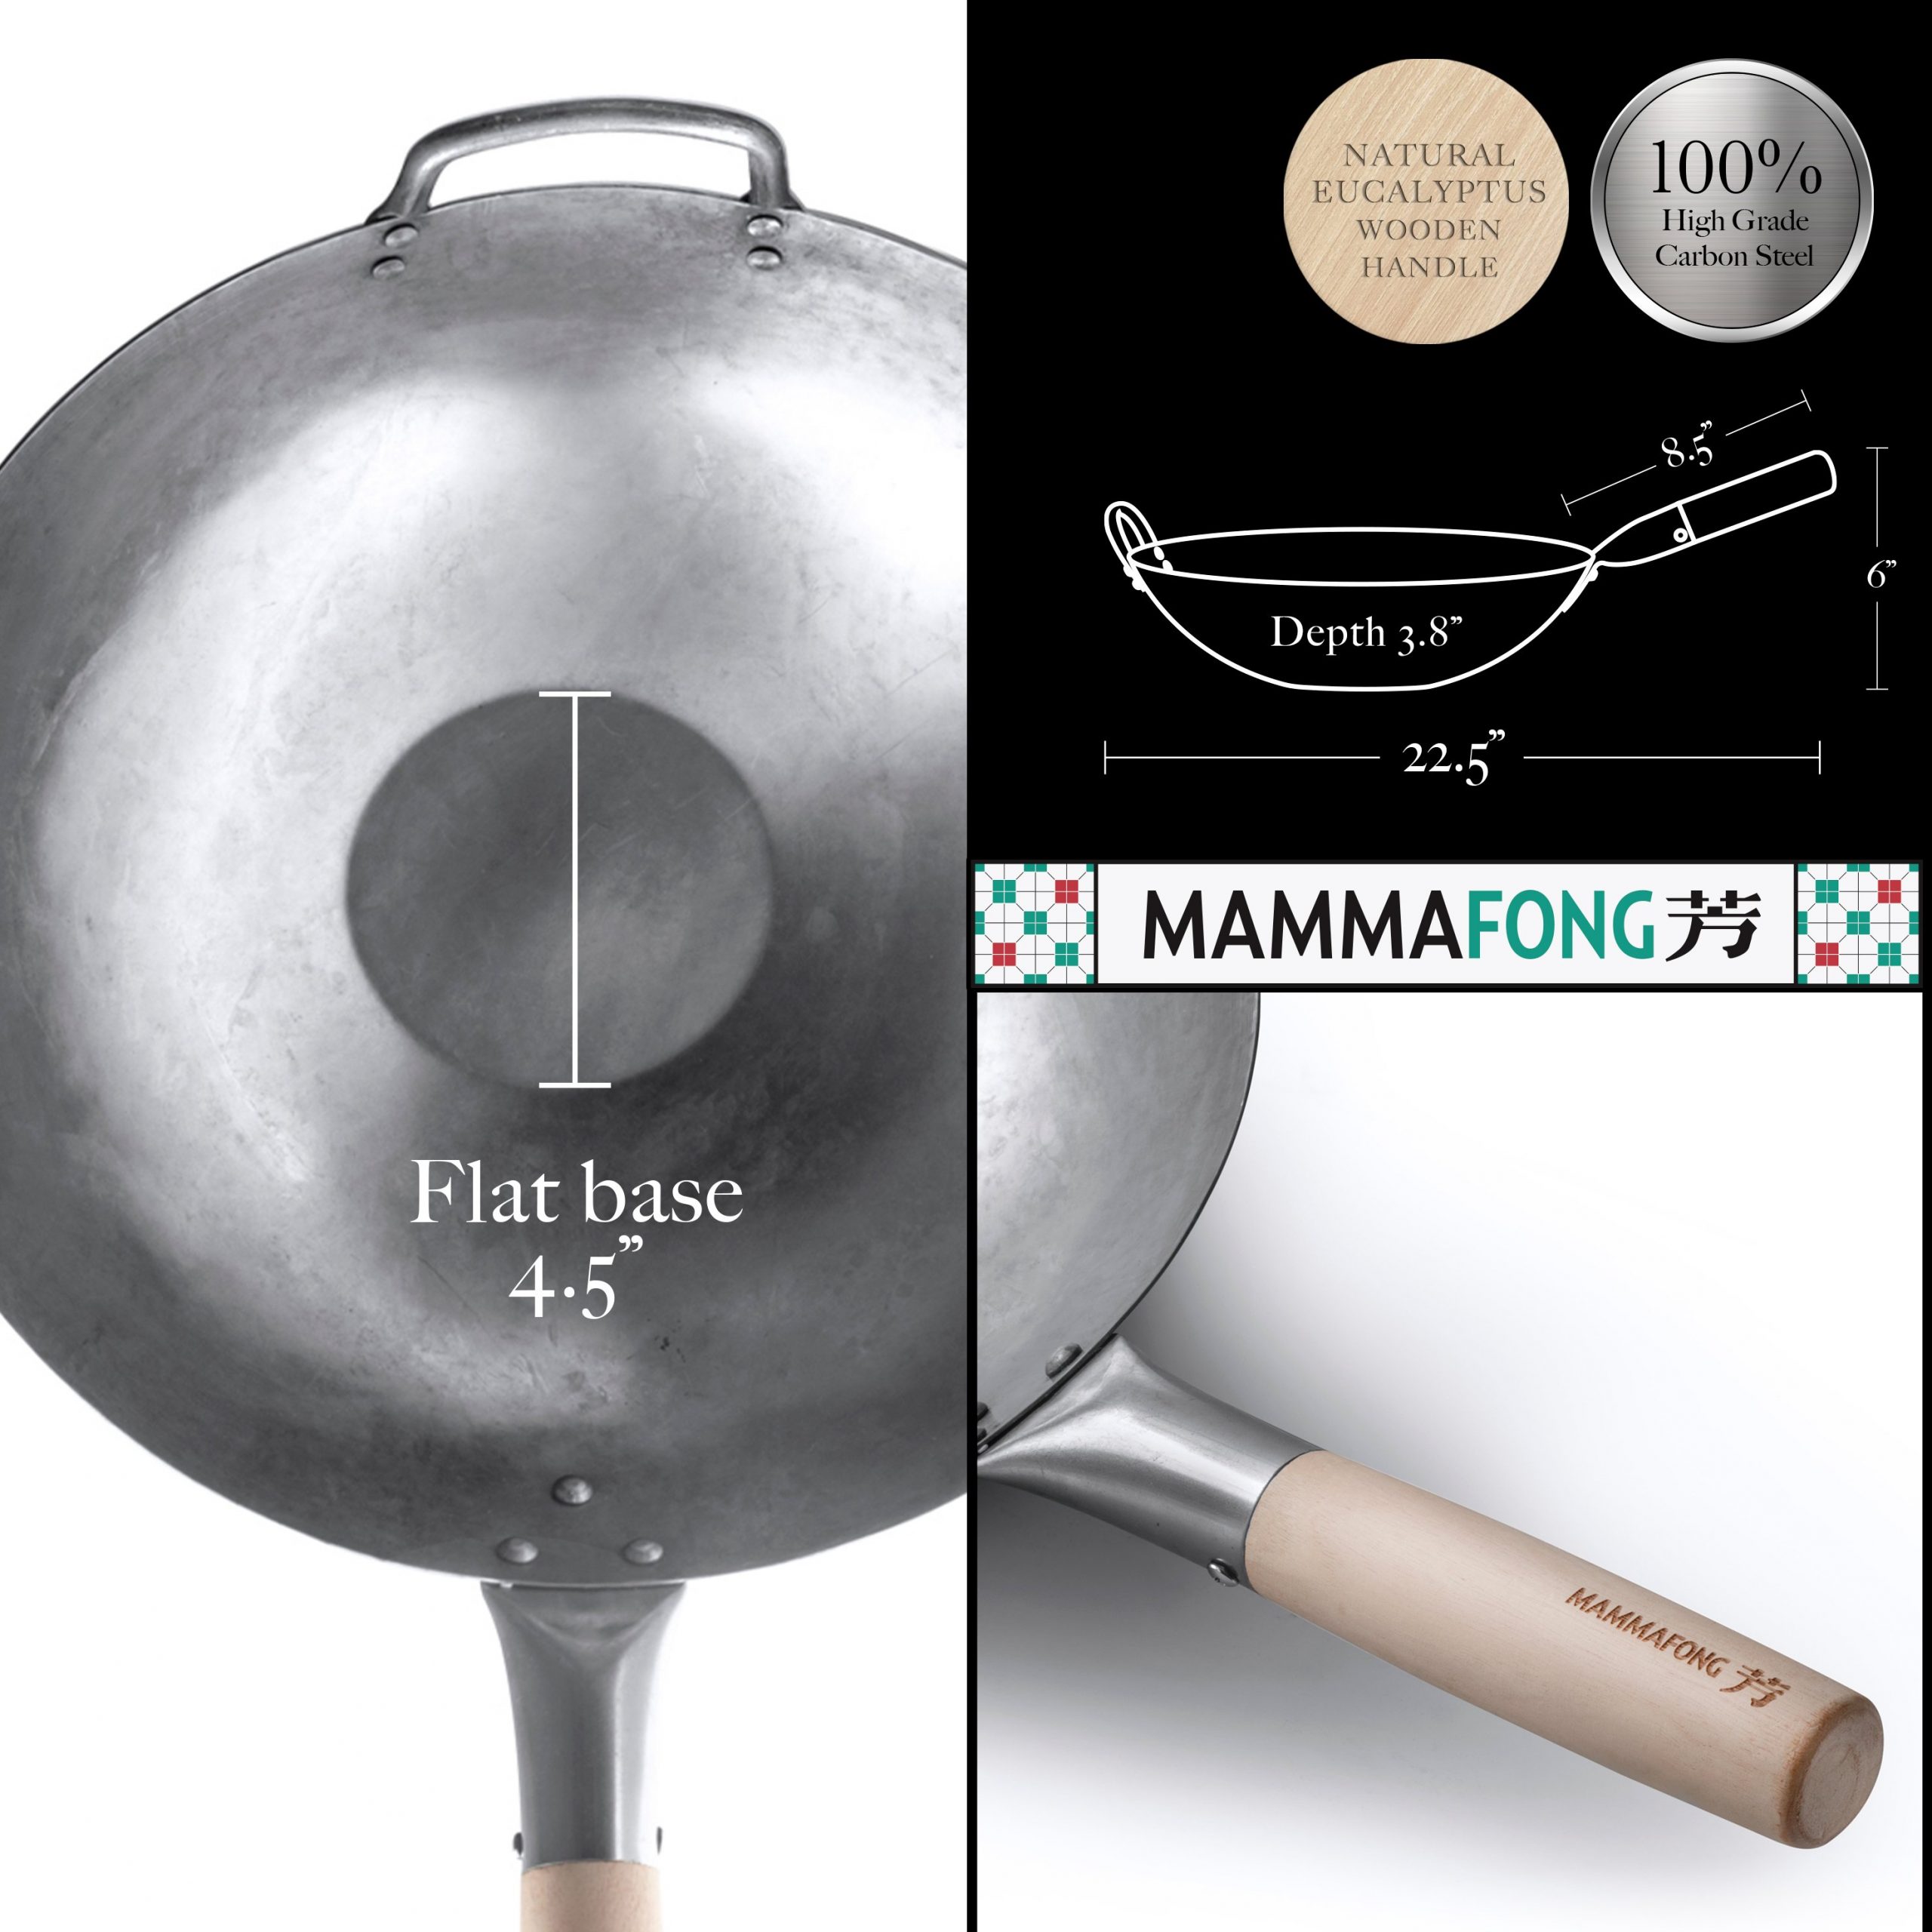 Flat-Bottomed vs. Round-Bottomed Woks: What's the Difference?